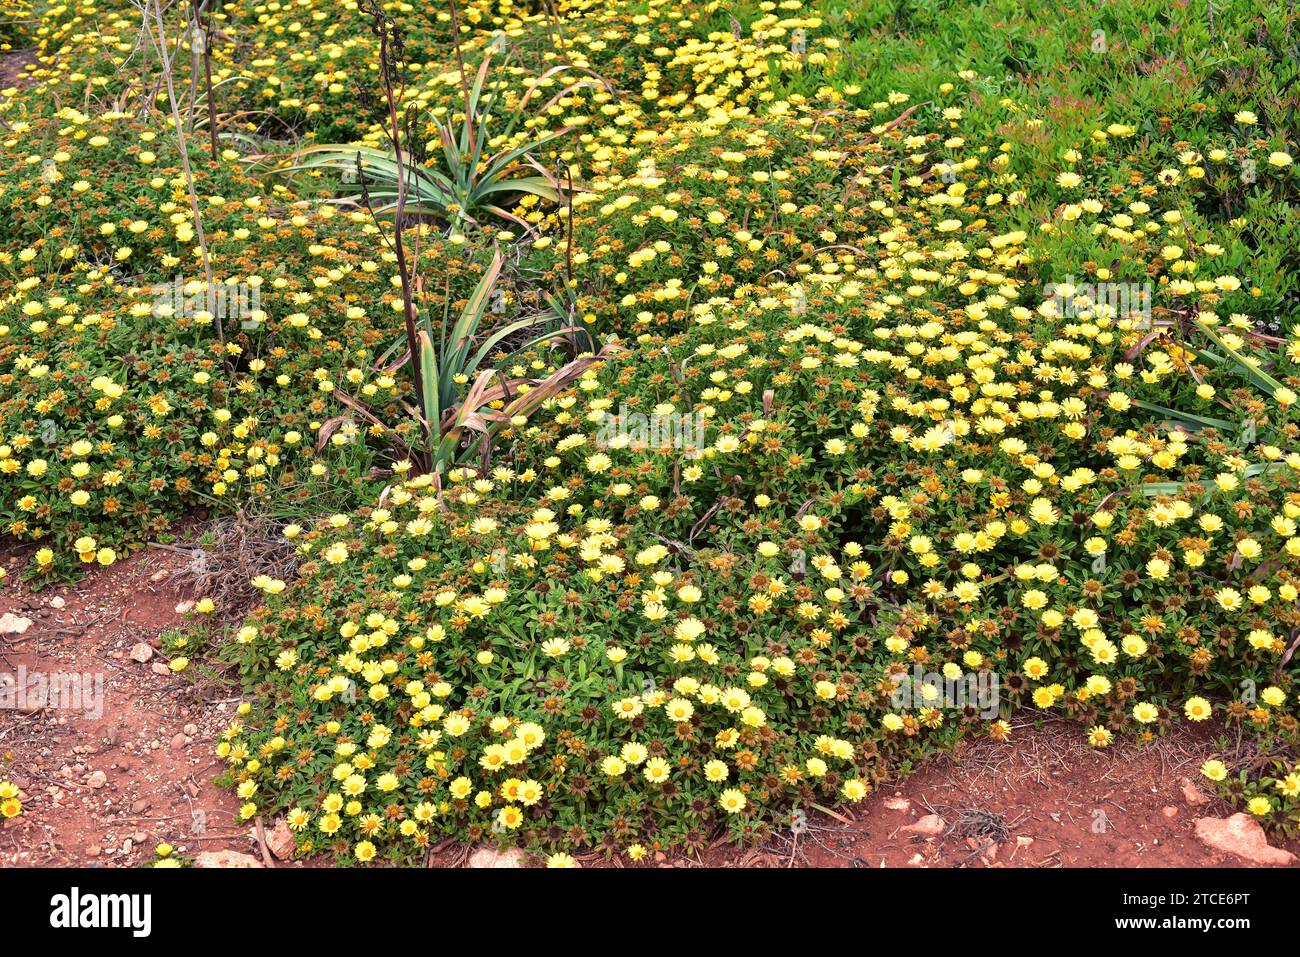 Margarita de mar (Asteriscus maritimus or Pallenis maritima) is a perennial plant native to Mediterranean coasts and Canary Islands. This photo was ta Stock Photo